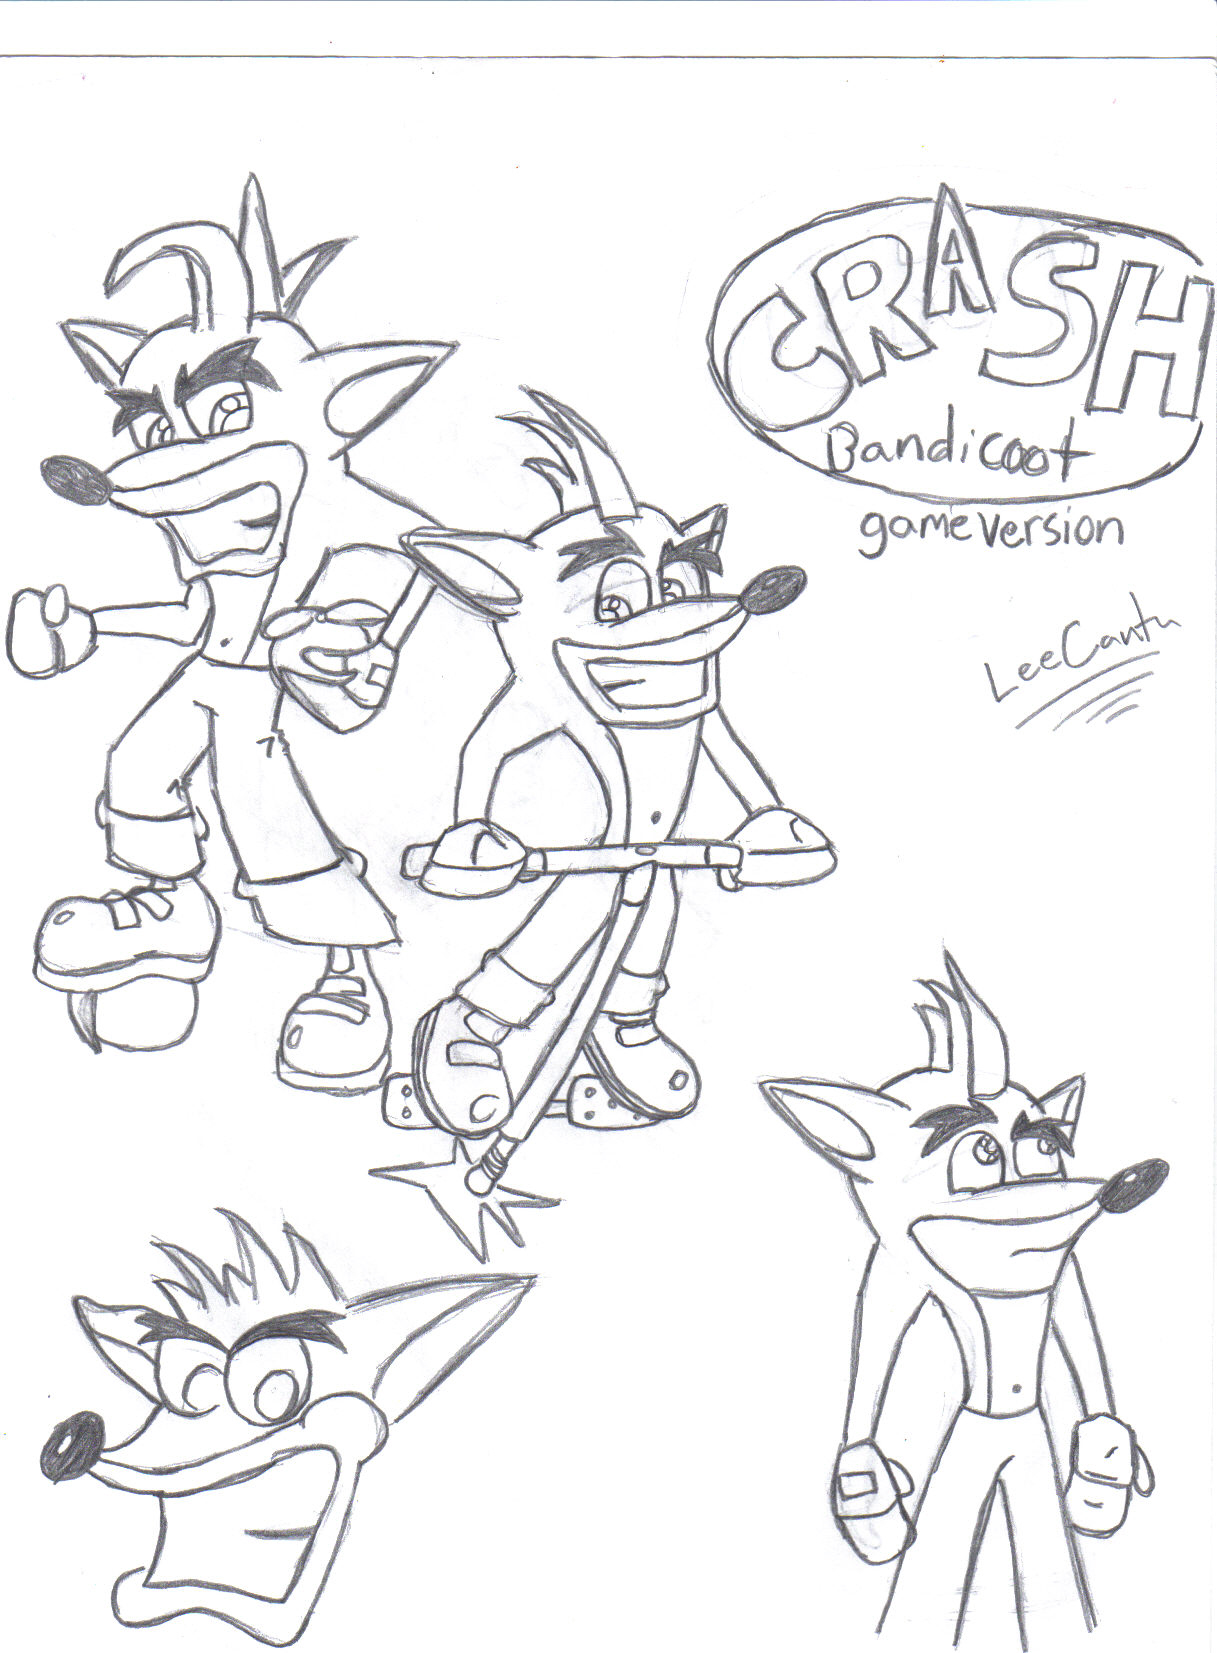 Crash poses! by calico1970